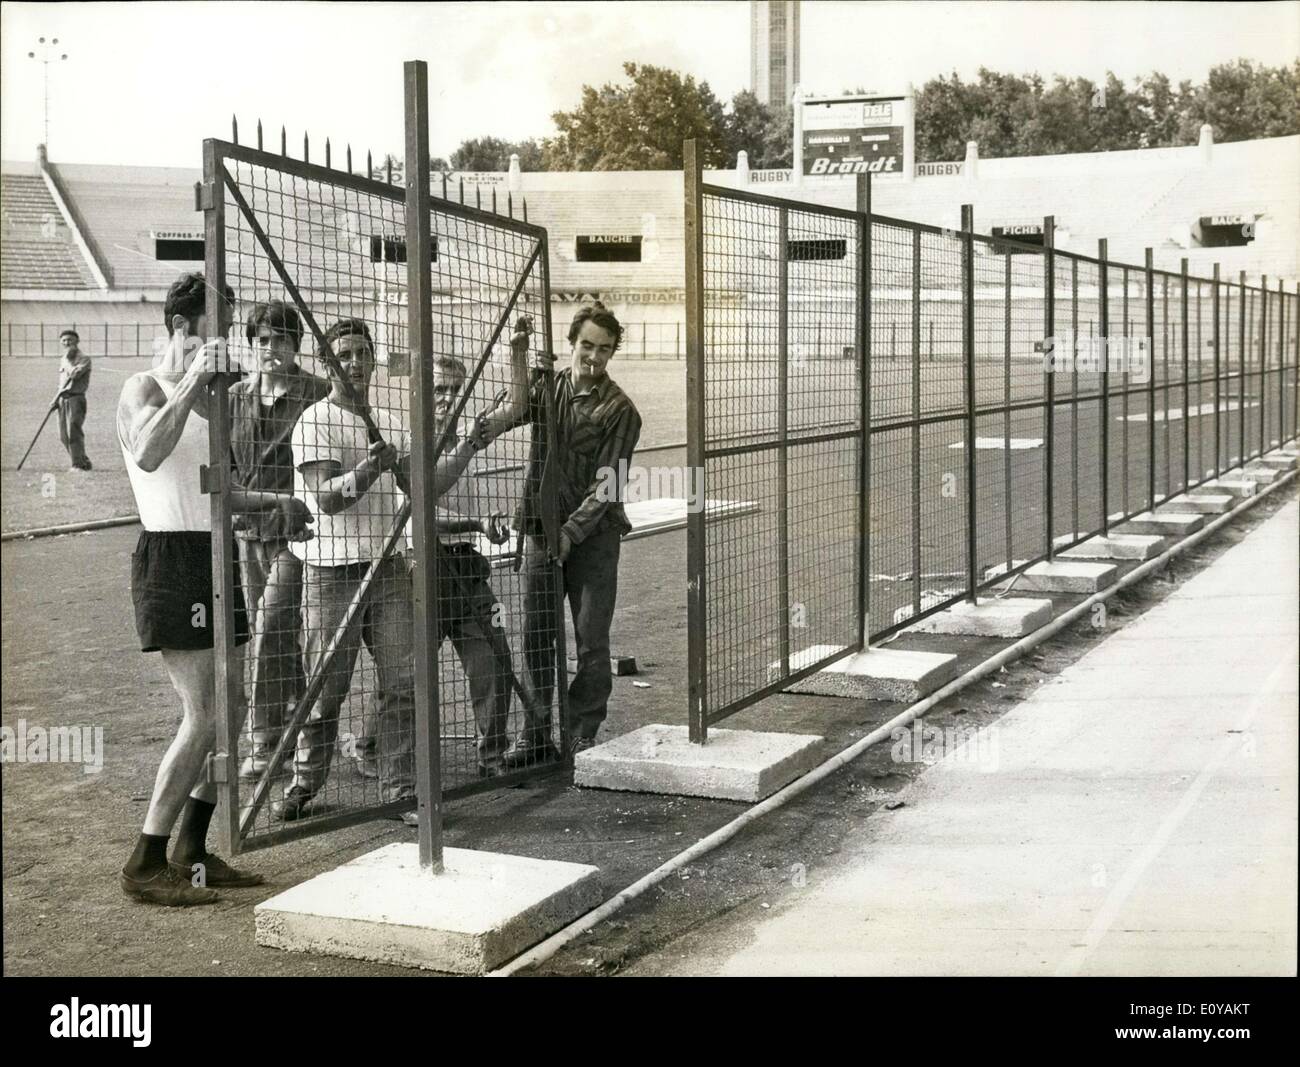 Sep. 18, 1969 - Added Security for Marseille Saint-Etienne Match in Marseille .c Stock Photo